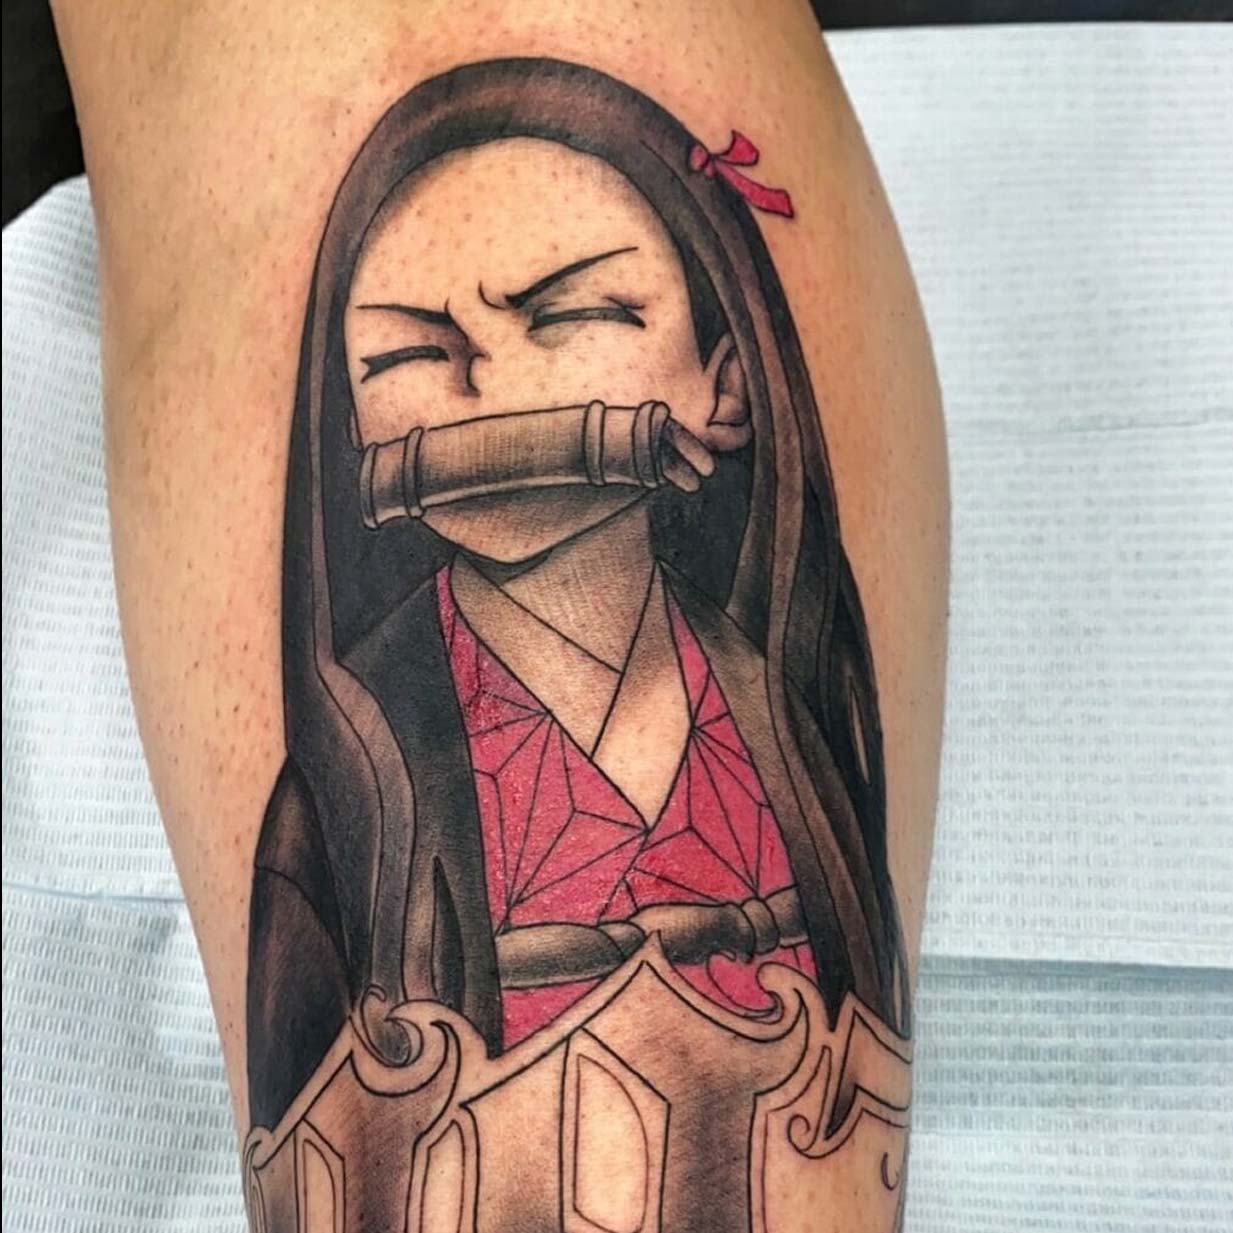 Best Tattoo Artists and Studios doing Anime tattoos